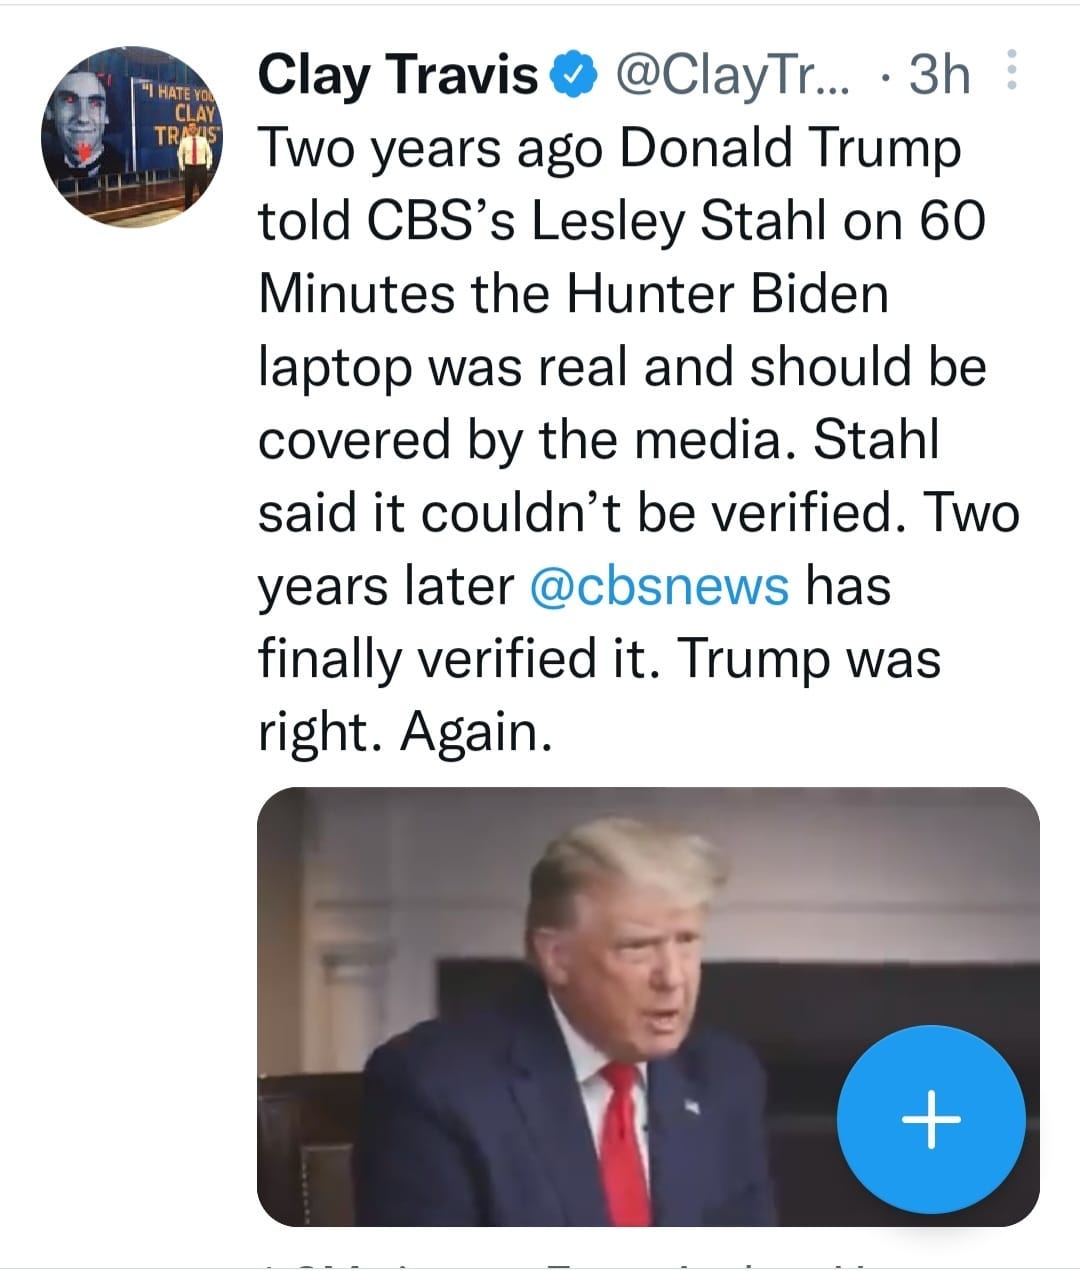 May be a Twitter screenshot of 2 people, people standing and text that says 'HAT CLAY Clay Travis @ClayTr... 3h Two years ago Donald Trump told CBS's Lesley Stahl on 60 Minutes the Hunter Biden laptop was real and should be covered by the media. Stahl said it couldn't be verified. Two years later @cbsnews has finally verified it. Trump was right. Again. +'